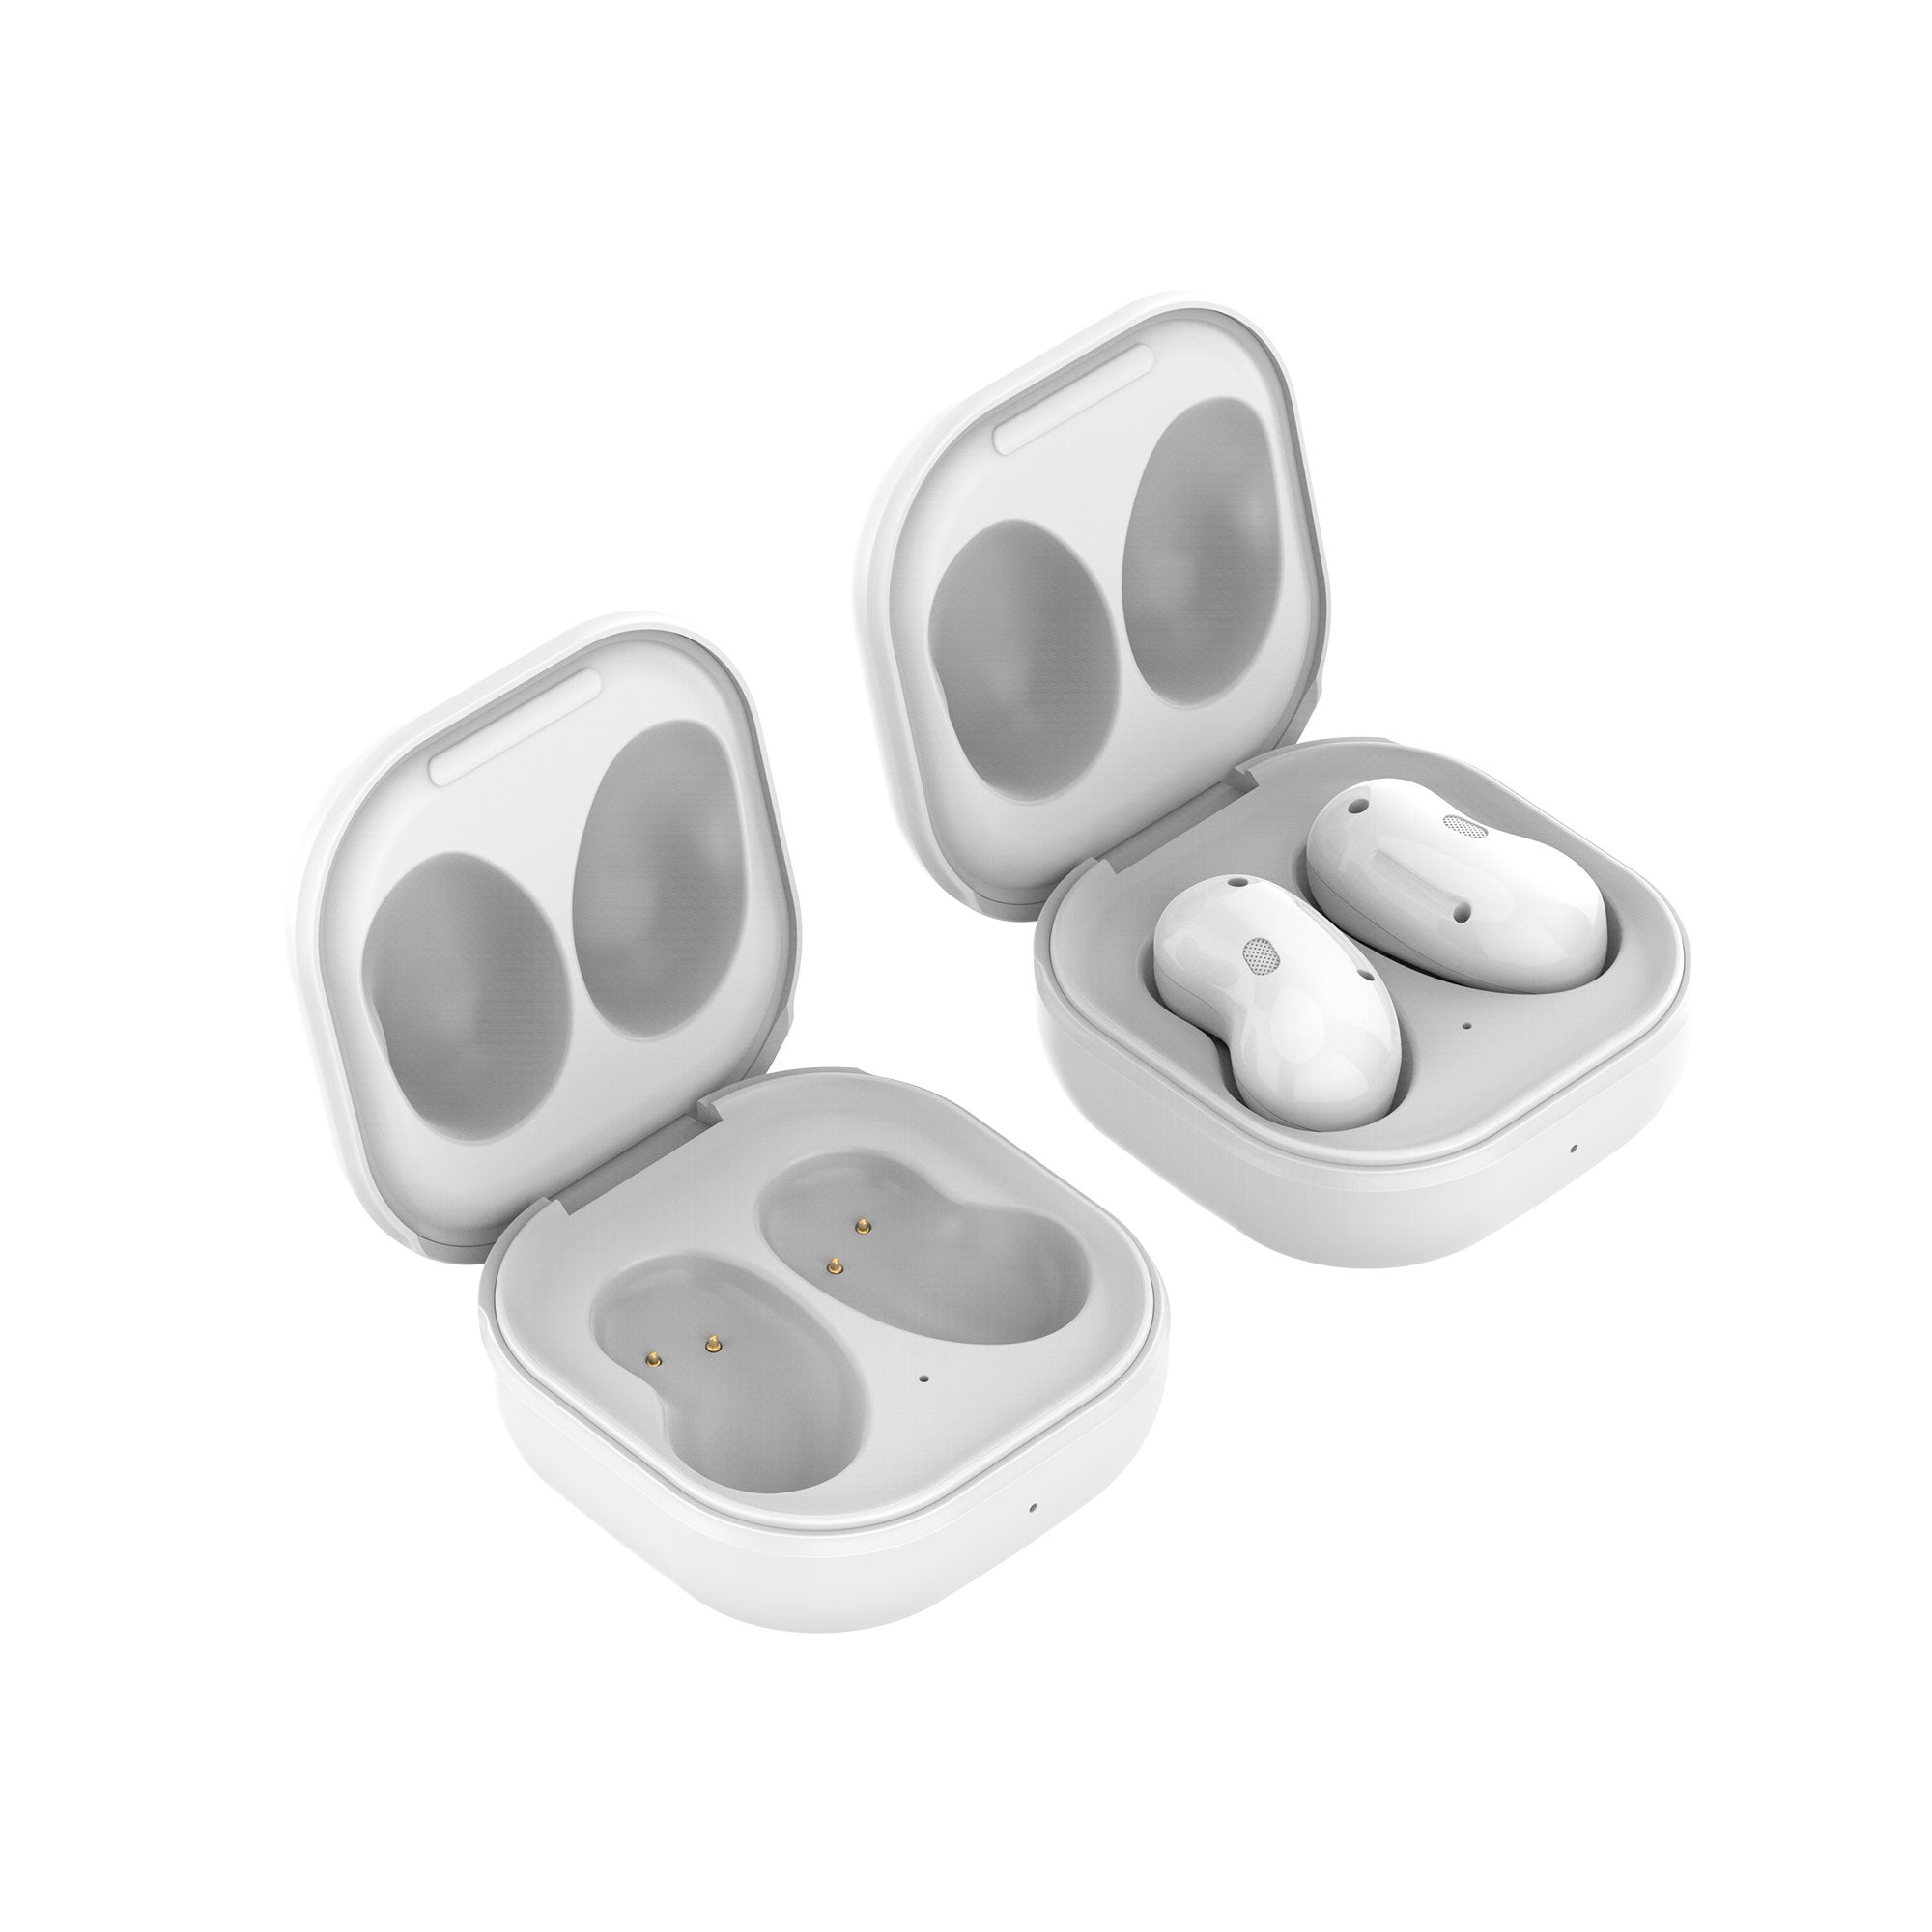 USB Charger Charging Case Earbuds Charging Box White for Samsung Galaxy Buds Live SM-R180